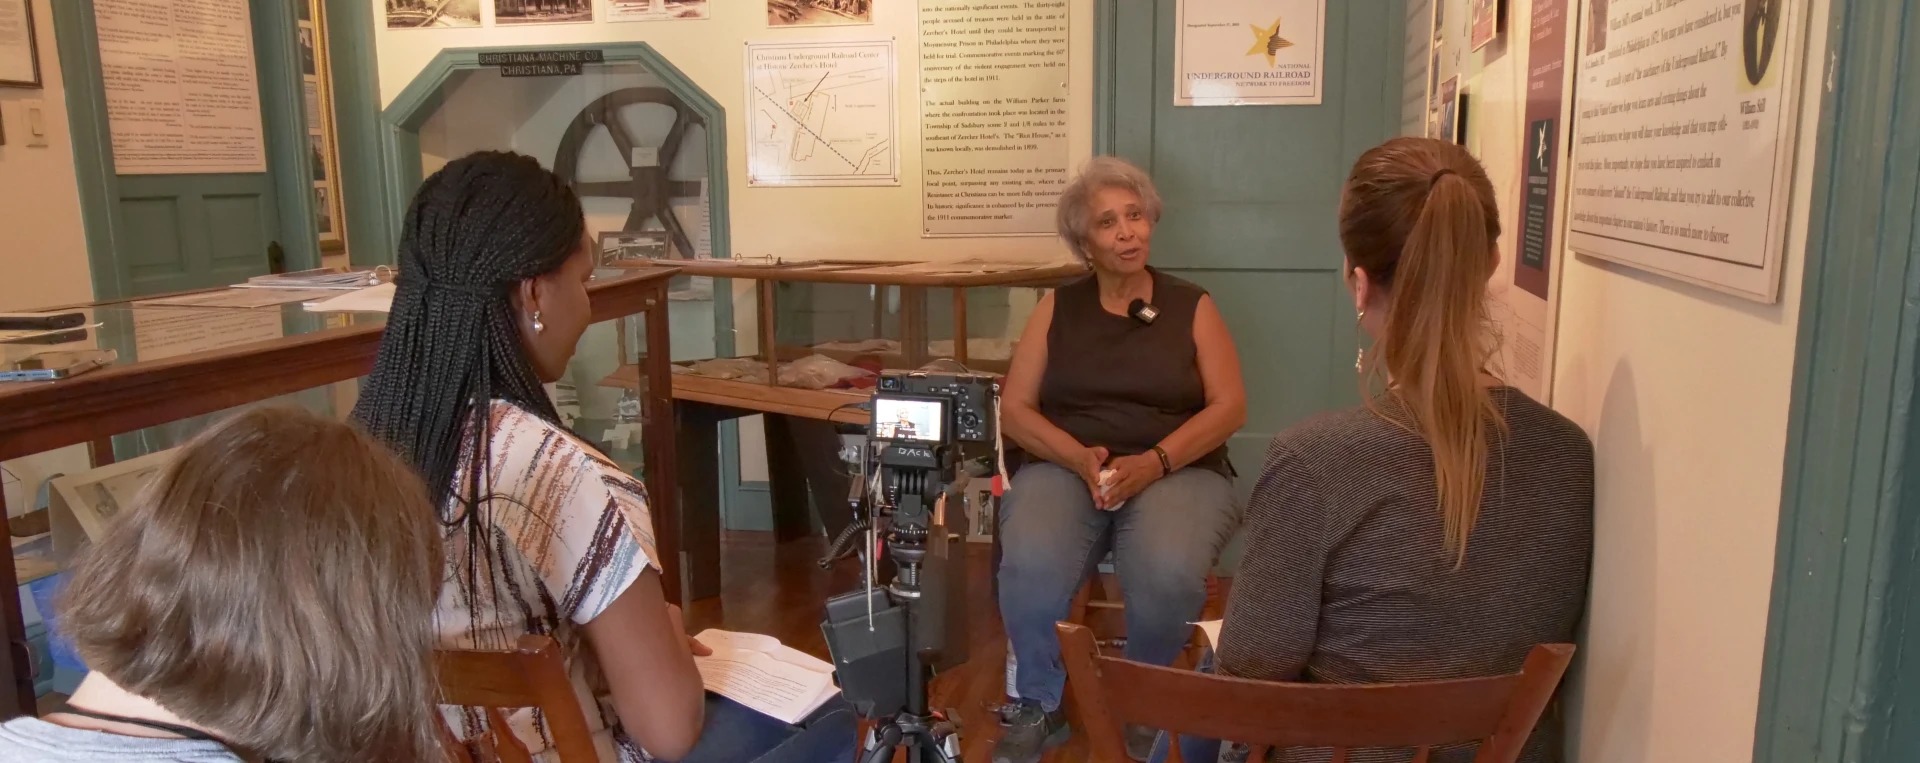 3 women participating in an oral history interview on camera